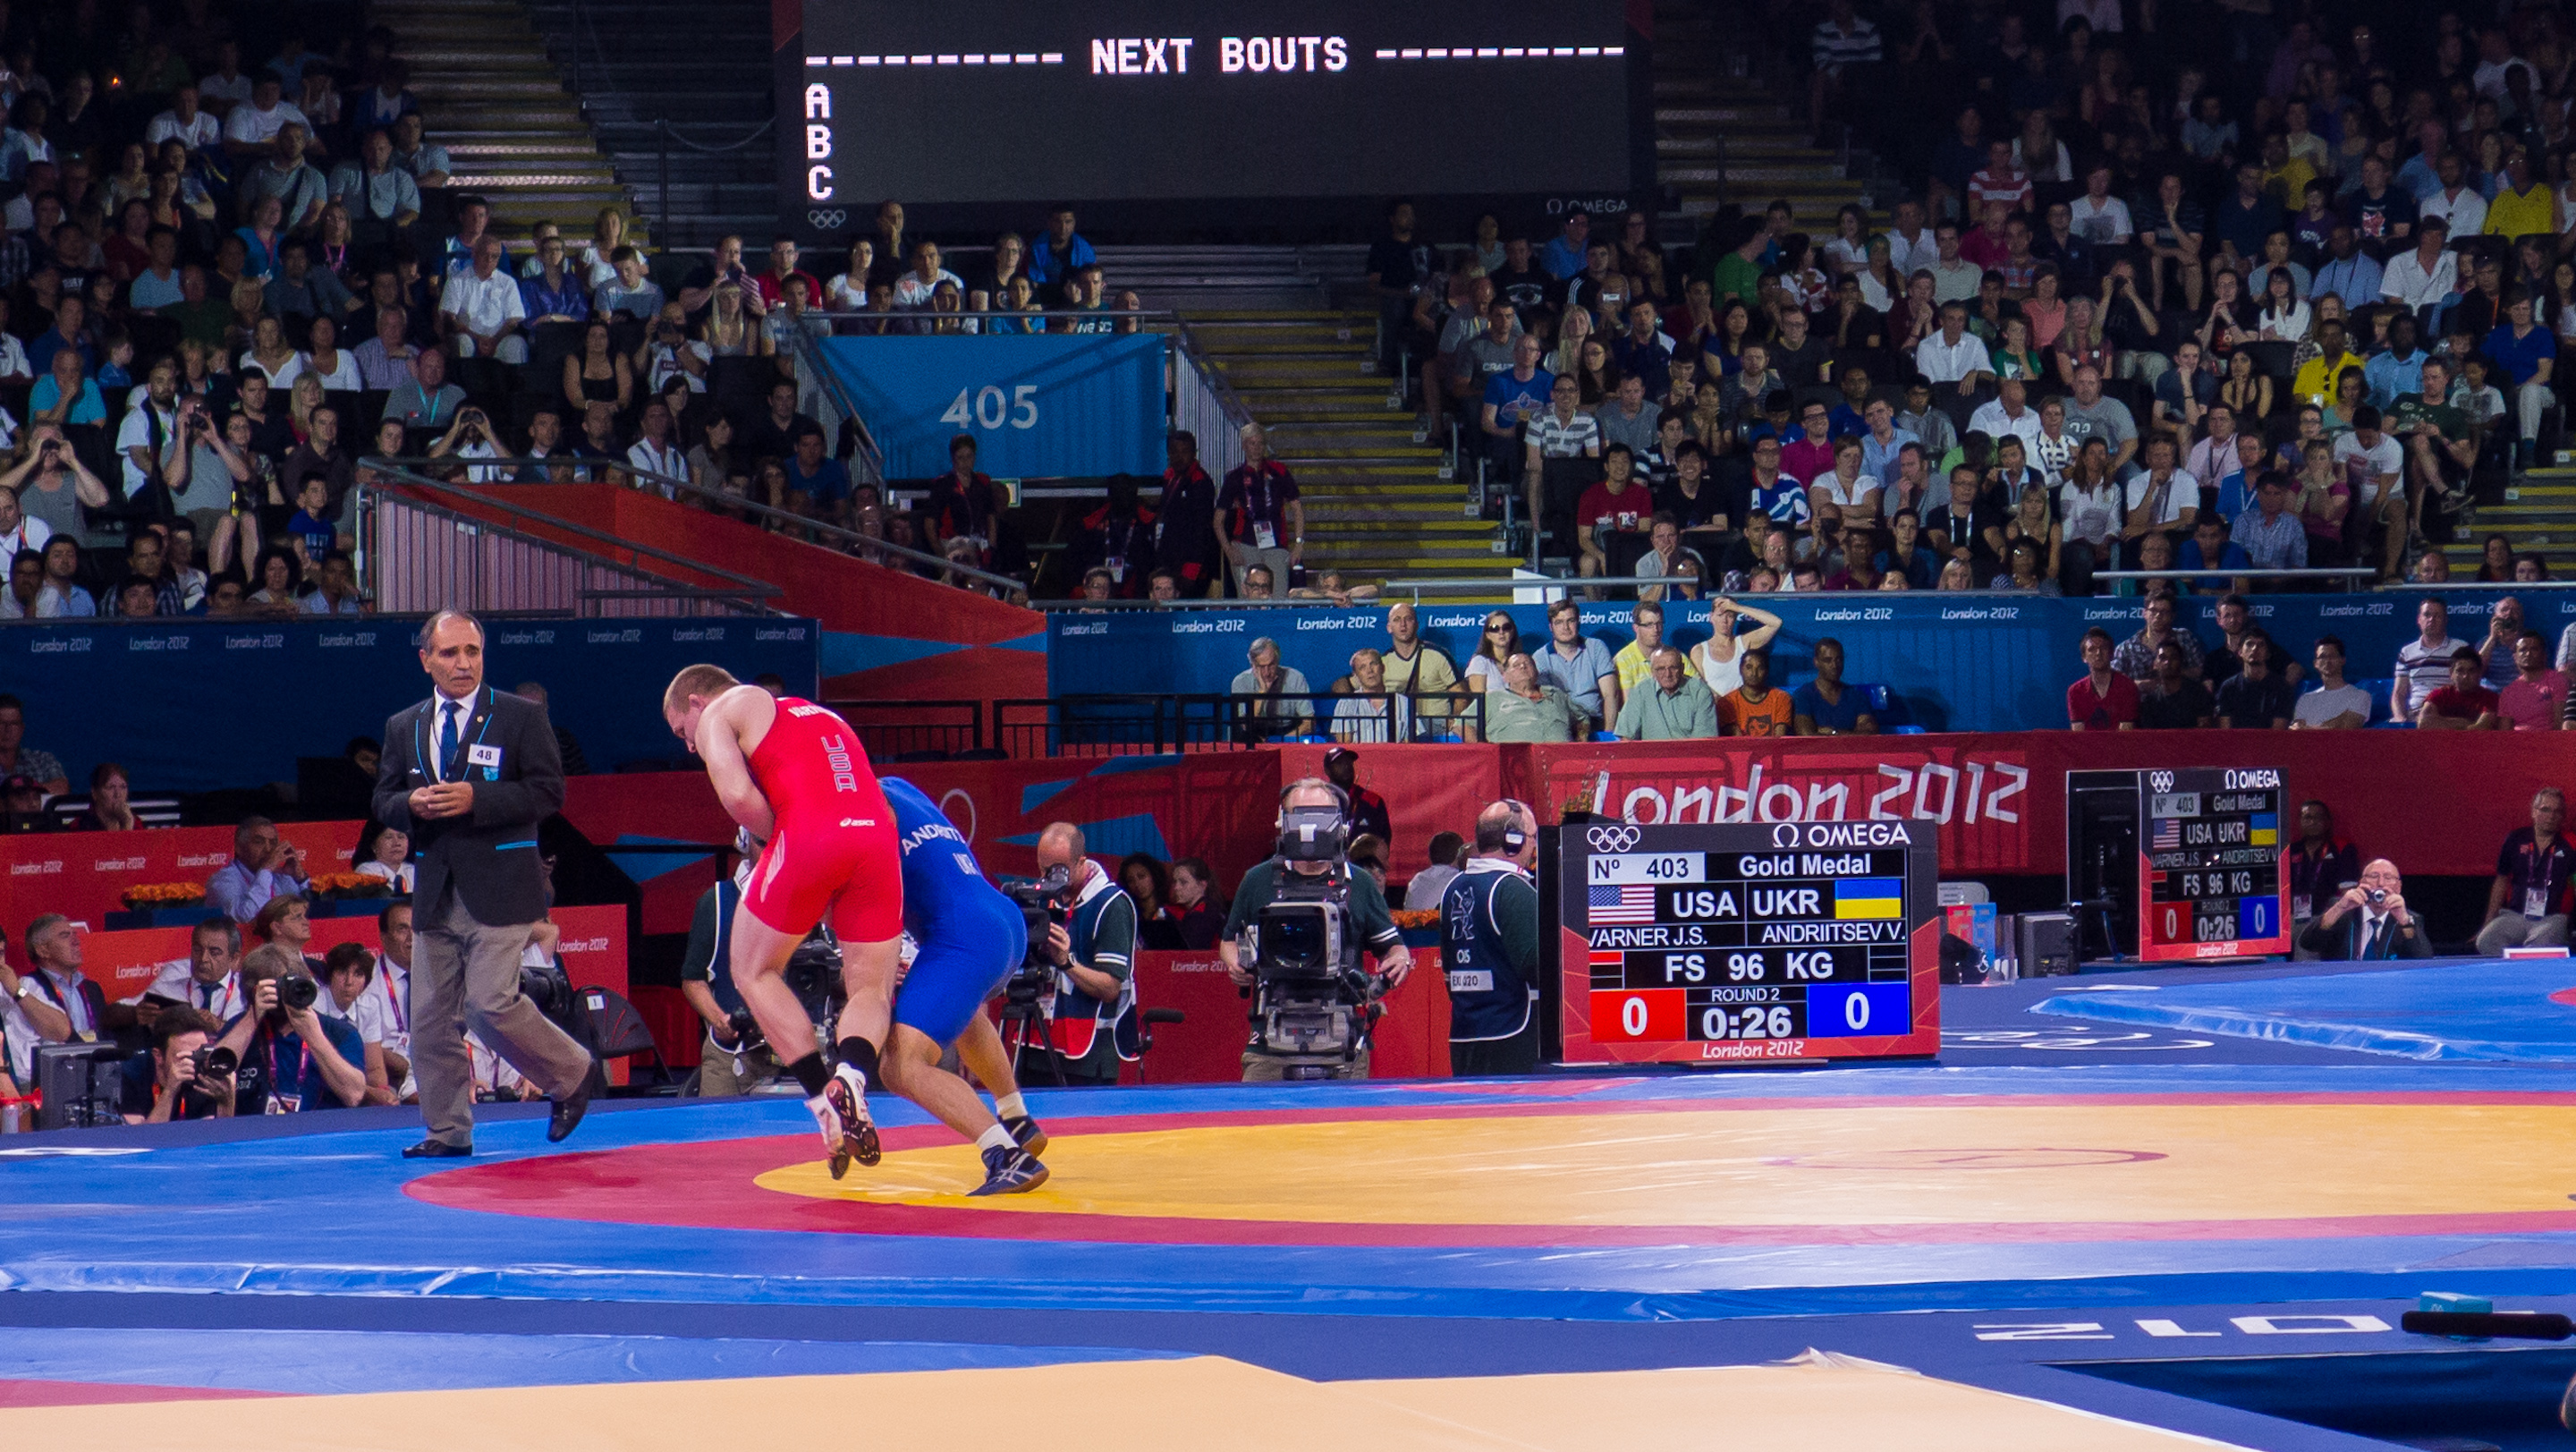 Olympic Freestyle Wrestling at Excel Gold Medal Match